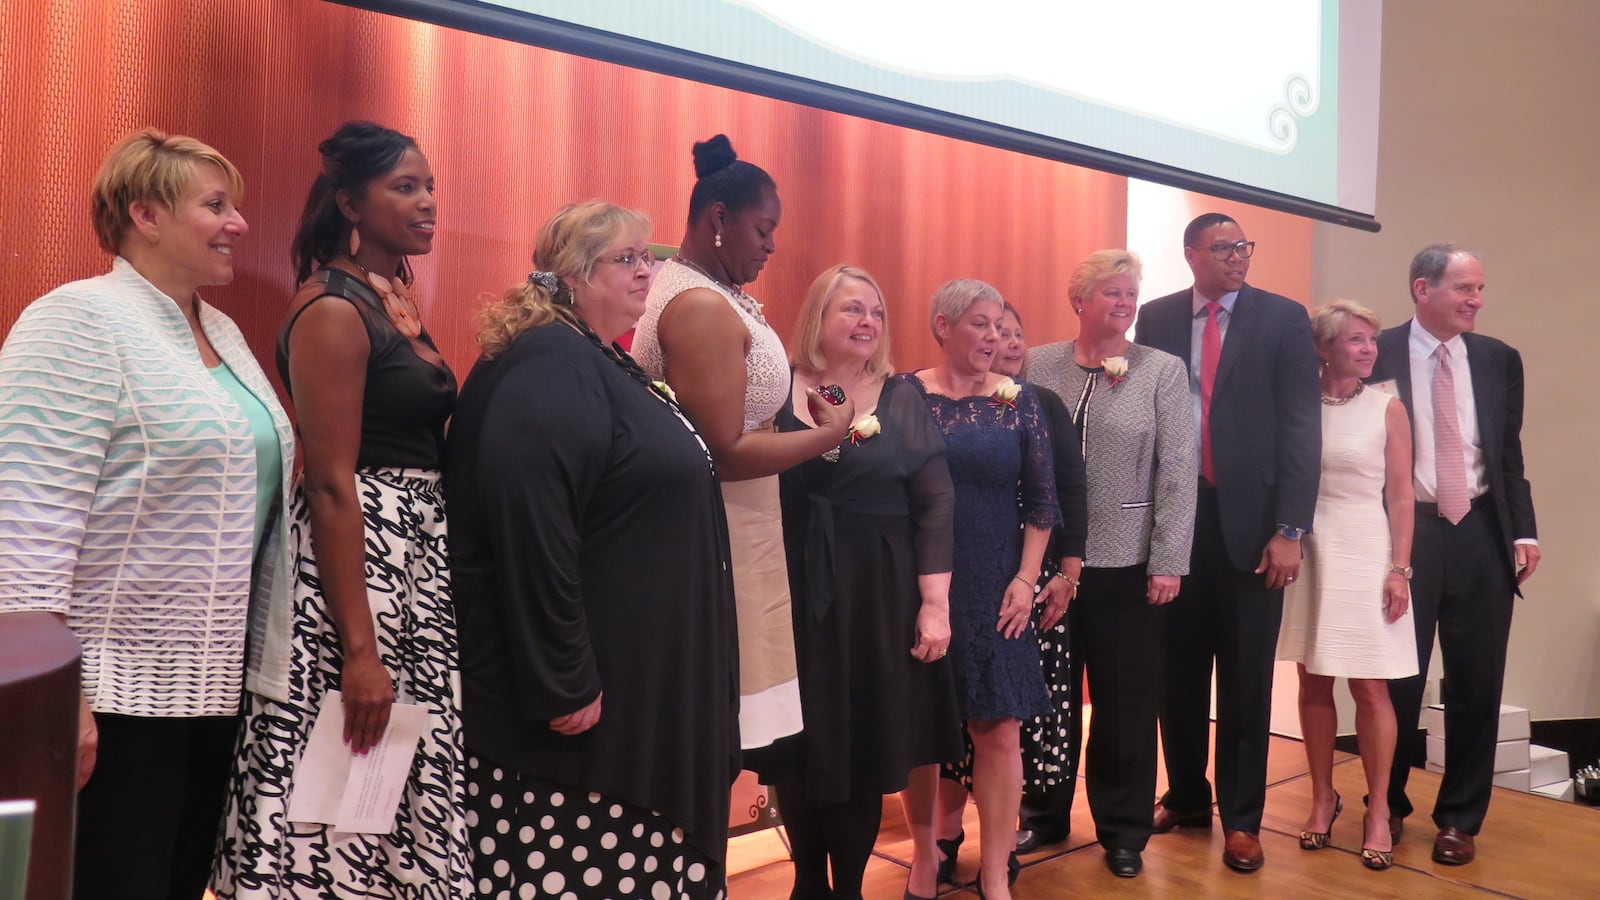 The Hubbard Awards honors "life-changing" Indianapolis Public Schools teachers and principals.